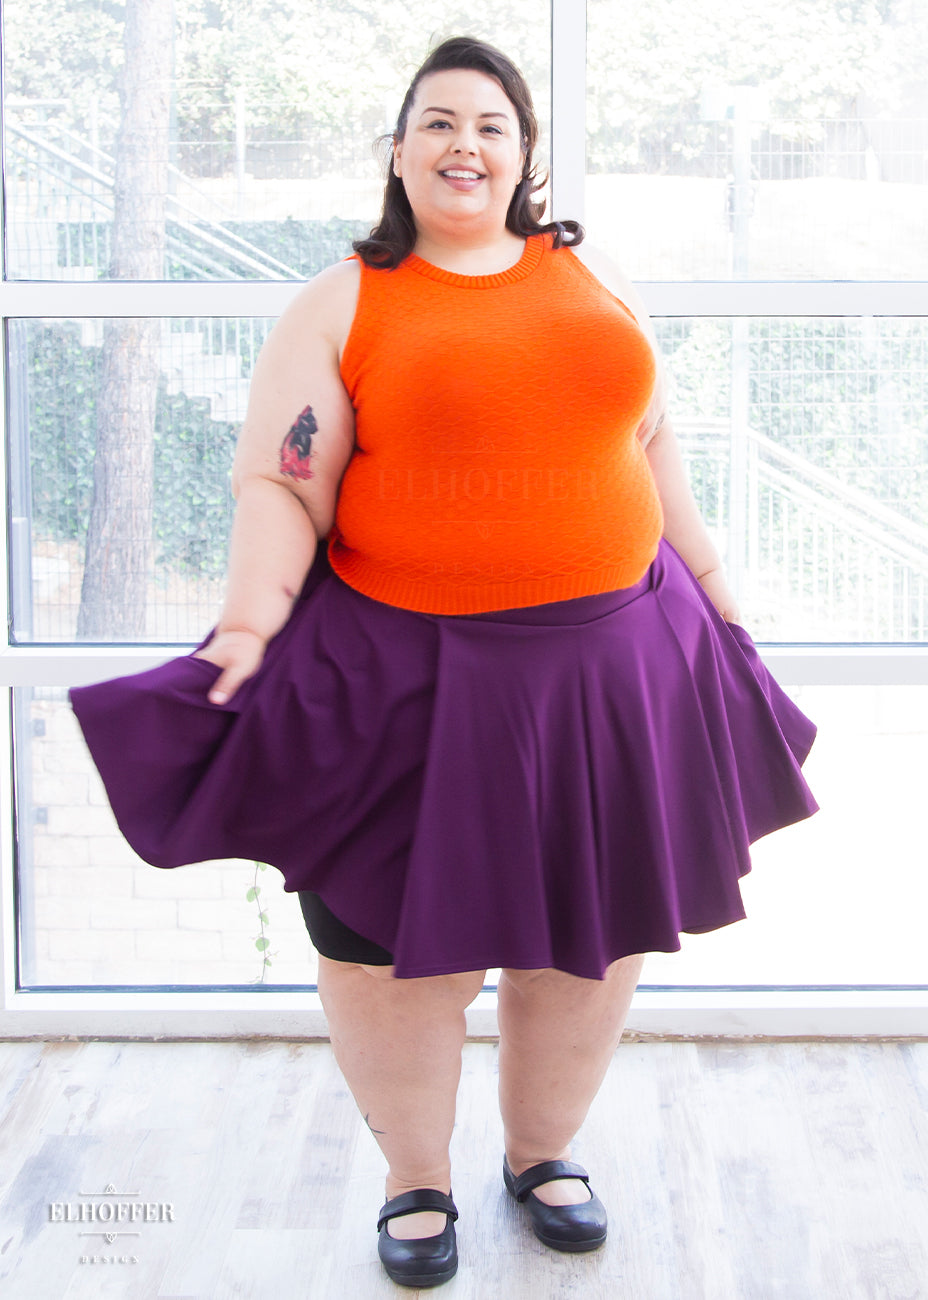 Angel (a fair skinned size 4XL model with brunette hair) models the knee length pleated plum purple skirt with pockets. She pairs it with a bright orange knit sleeveless Susan crop top.models the knee length pleated plum purple skirt with pockets. She pairs it with a bright orange knit sleeveless Susan crop top.